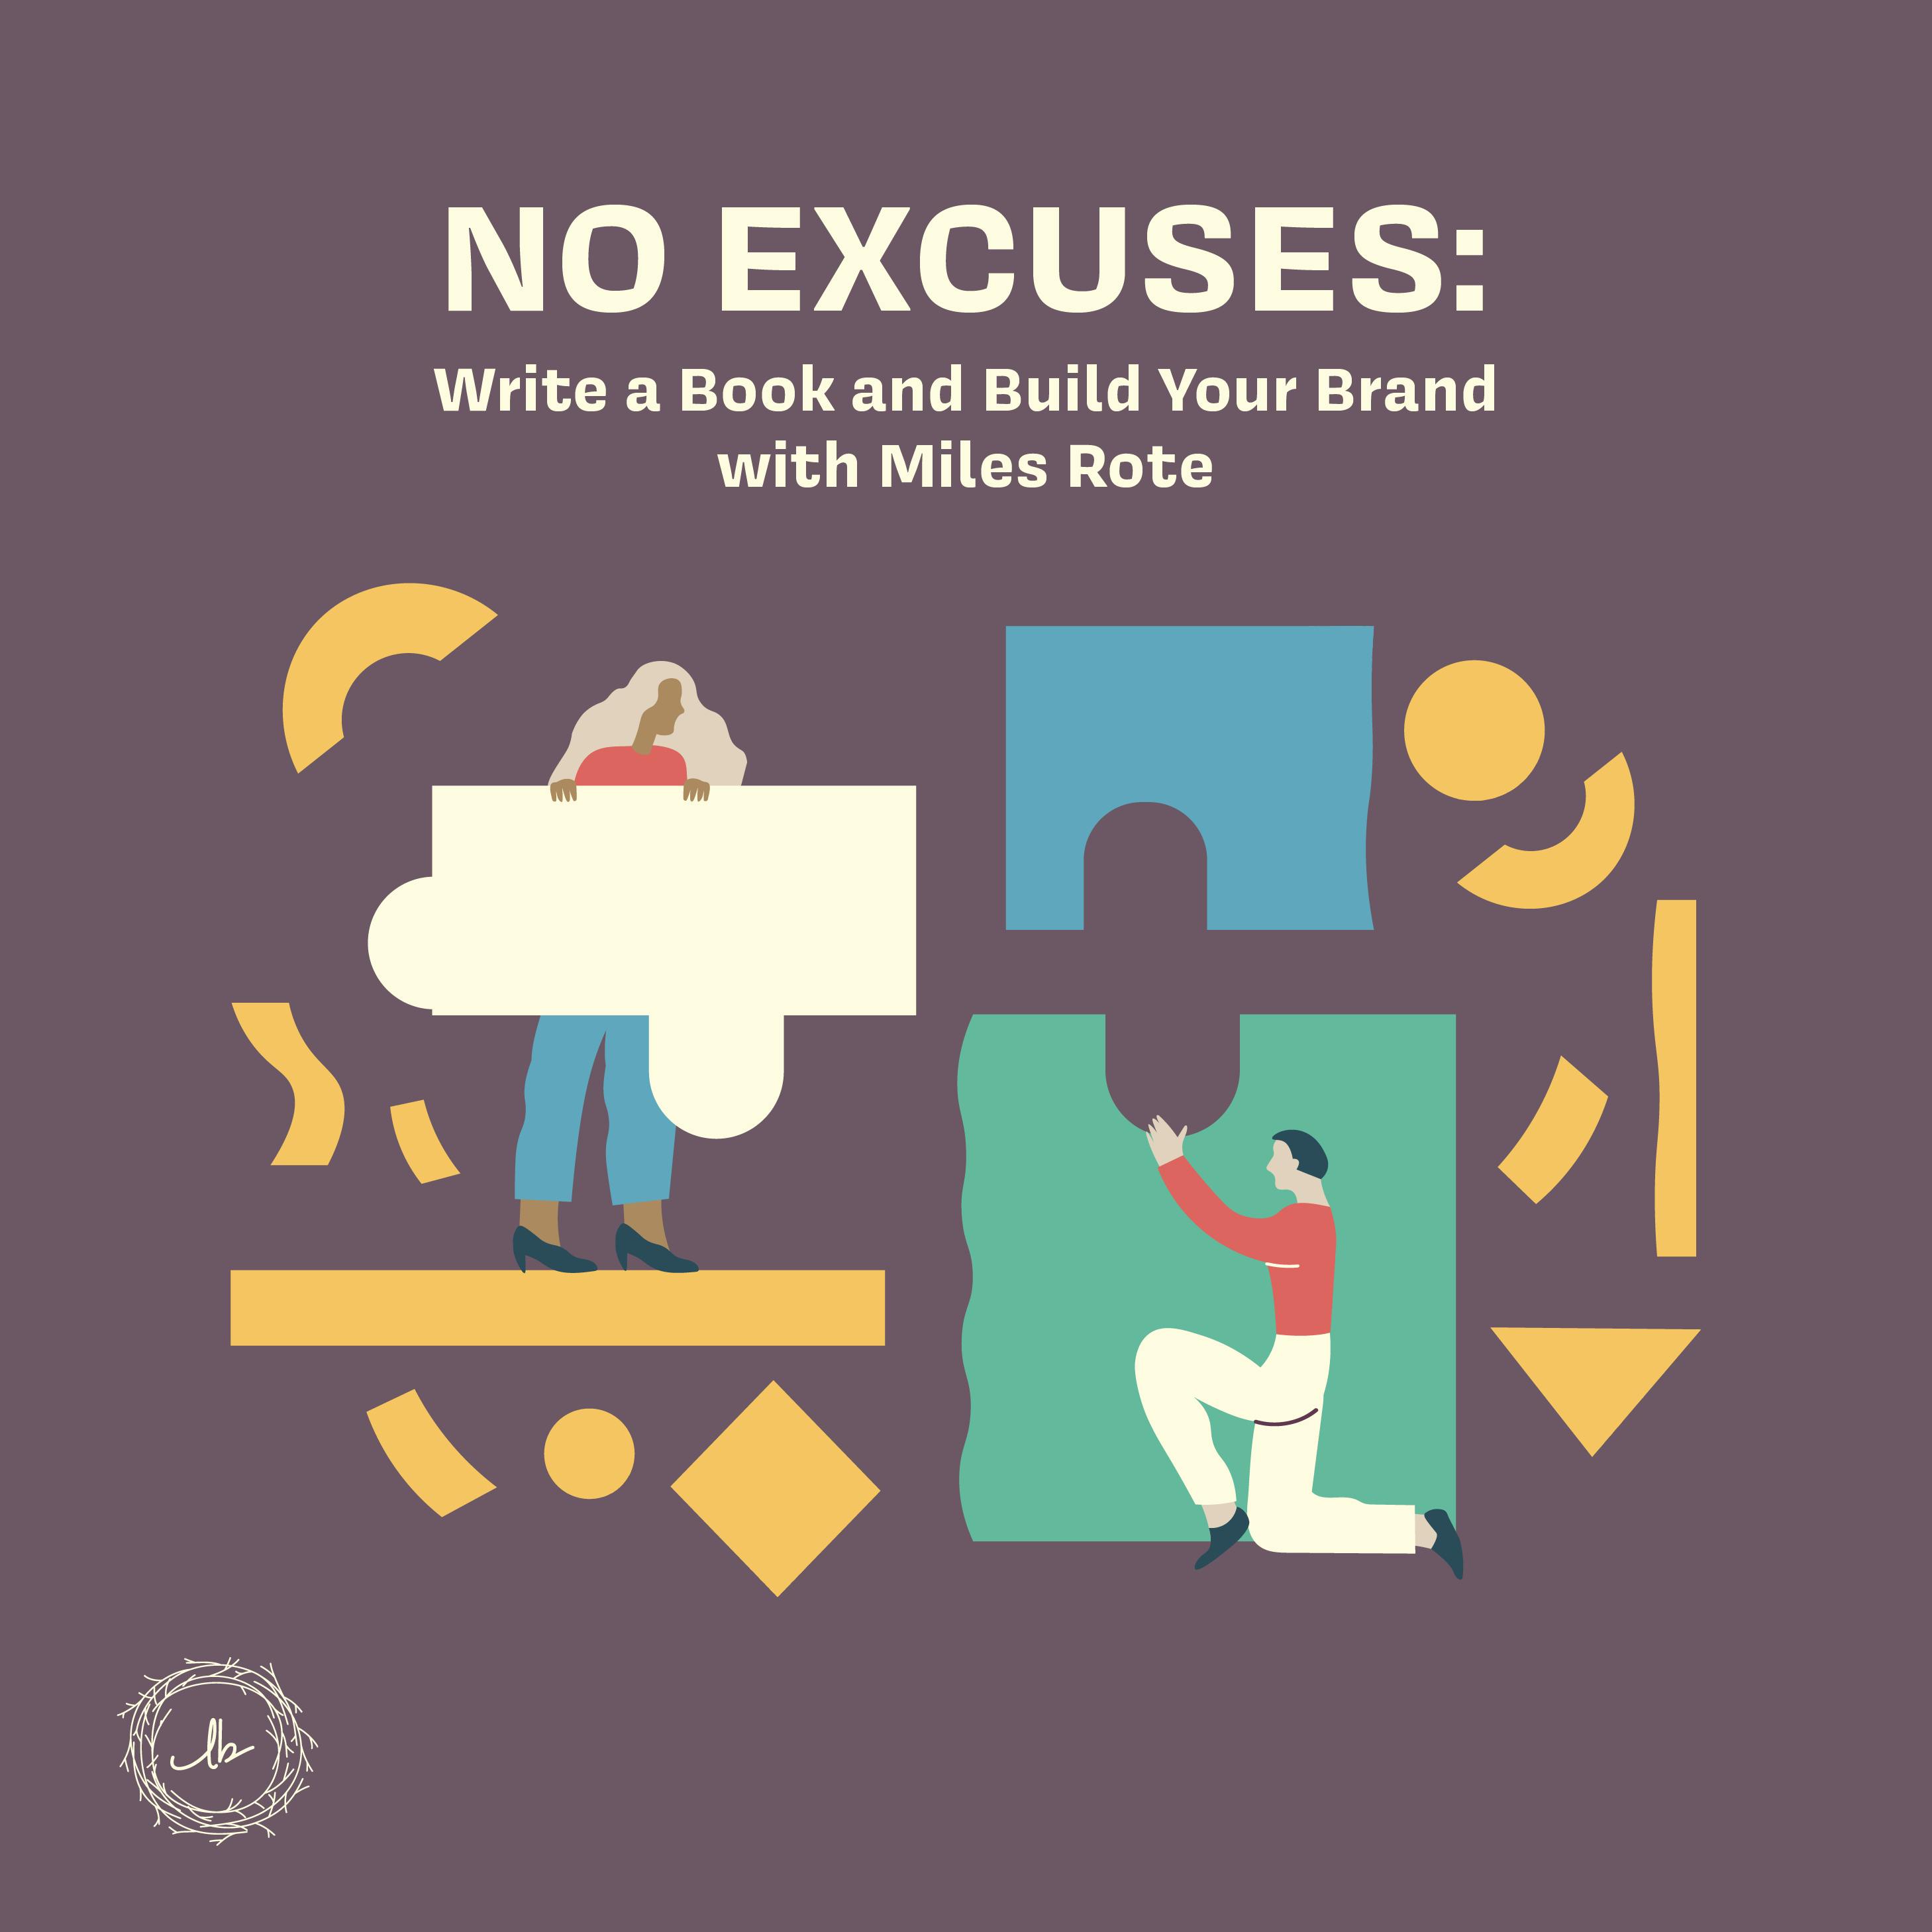 No Excuses: Write a Book and Build Your Brand with Miles Rote